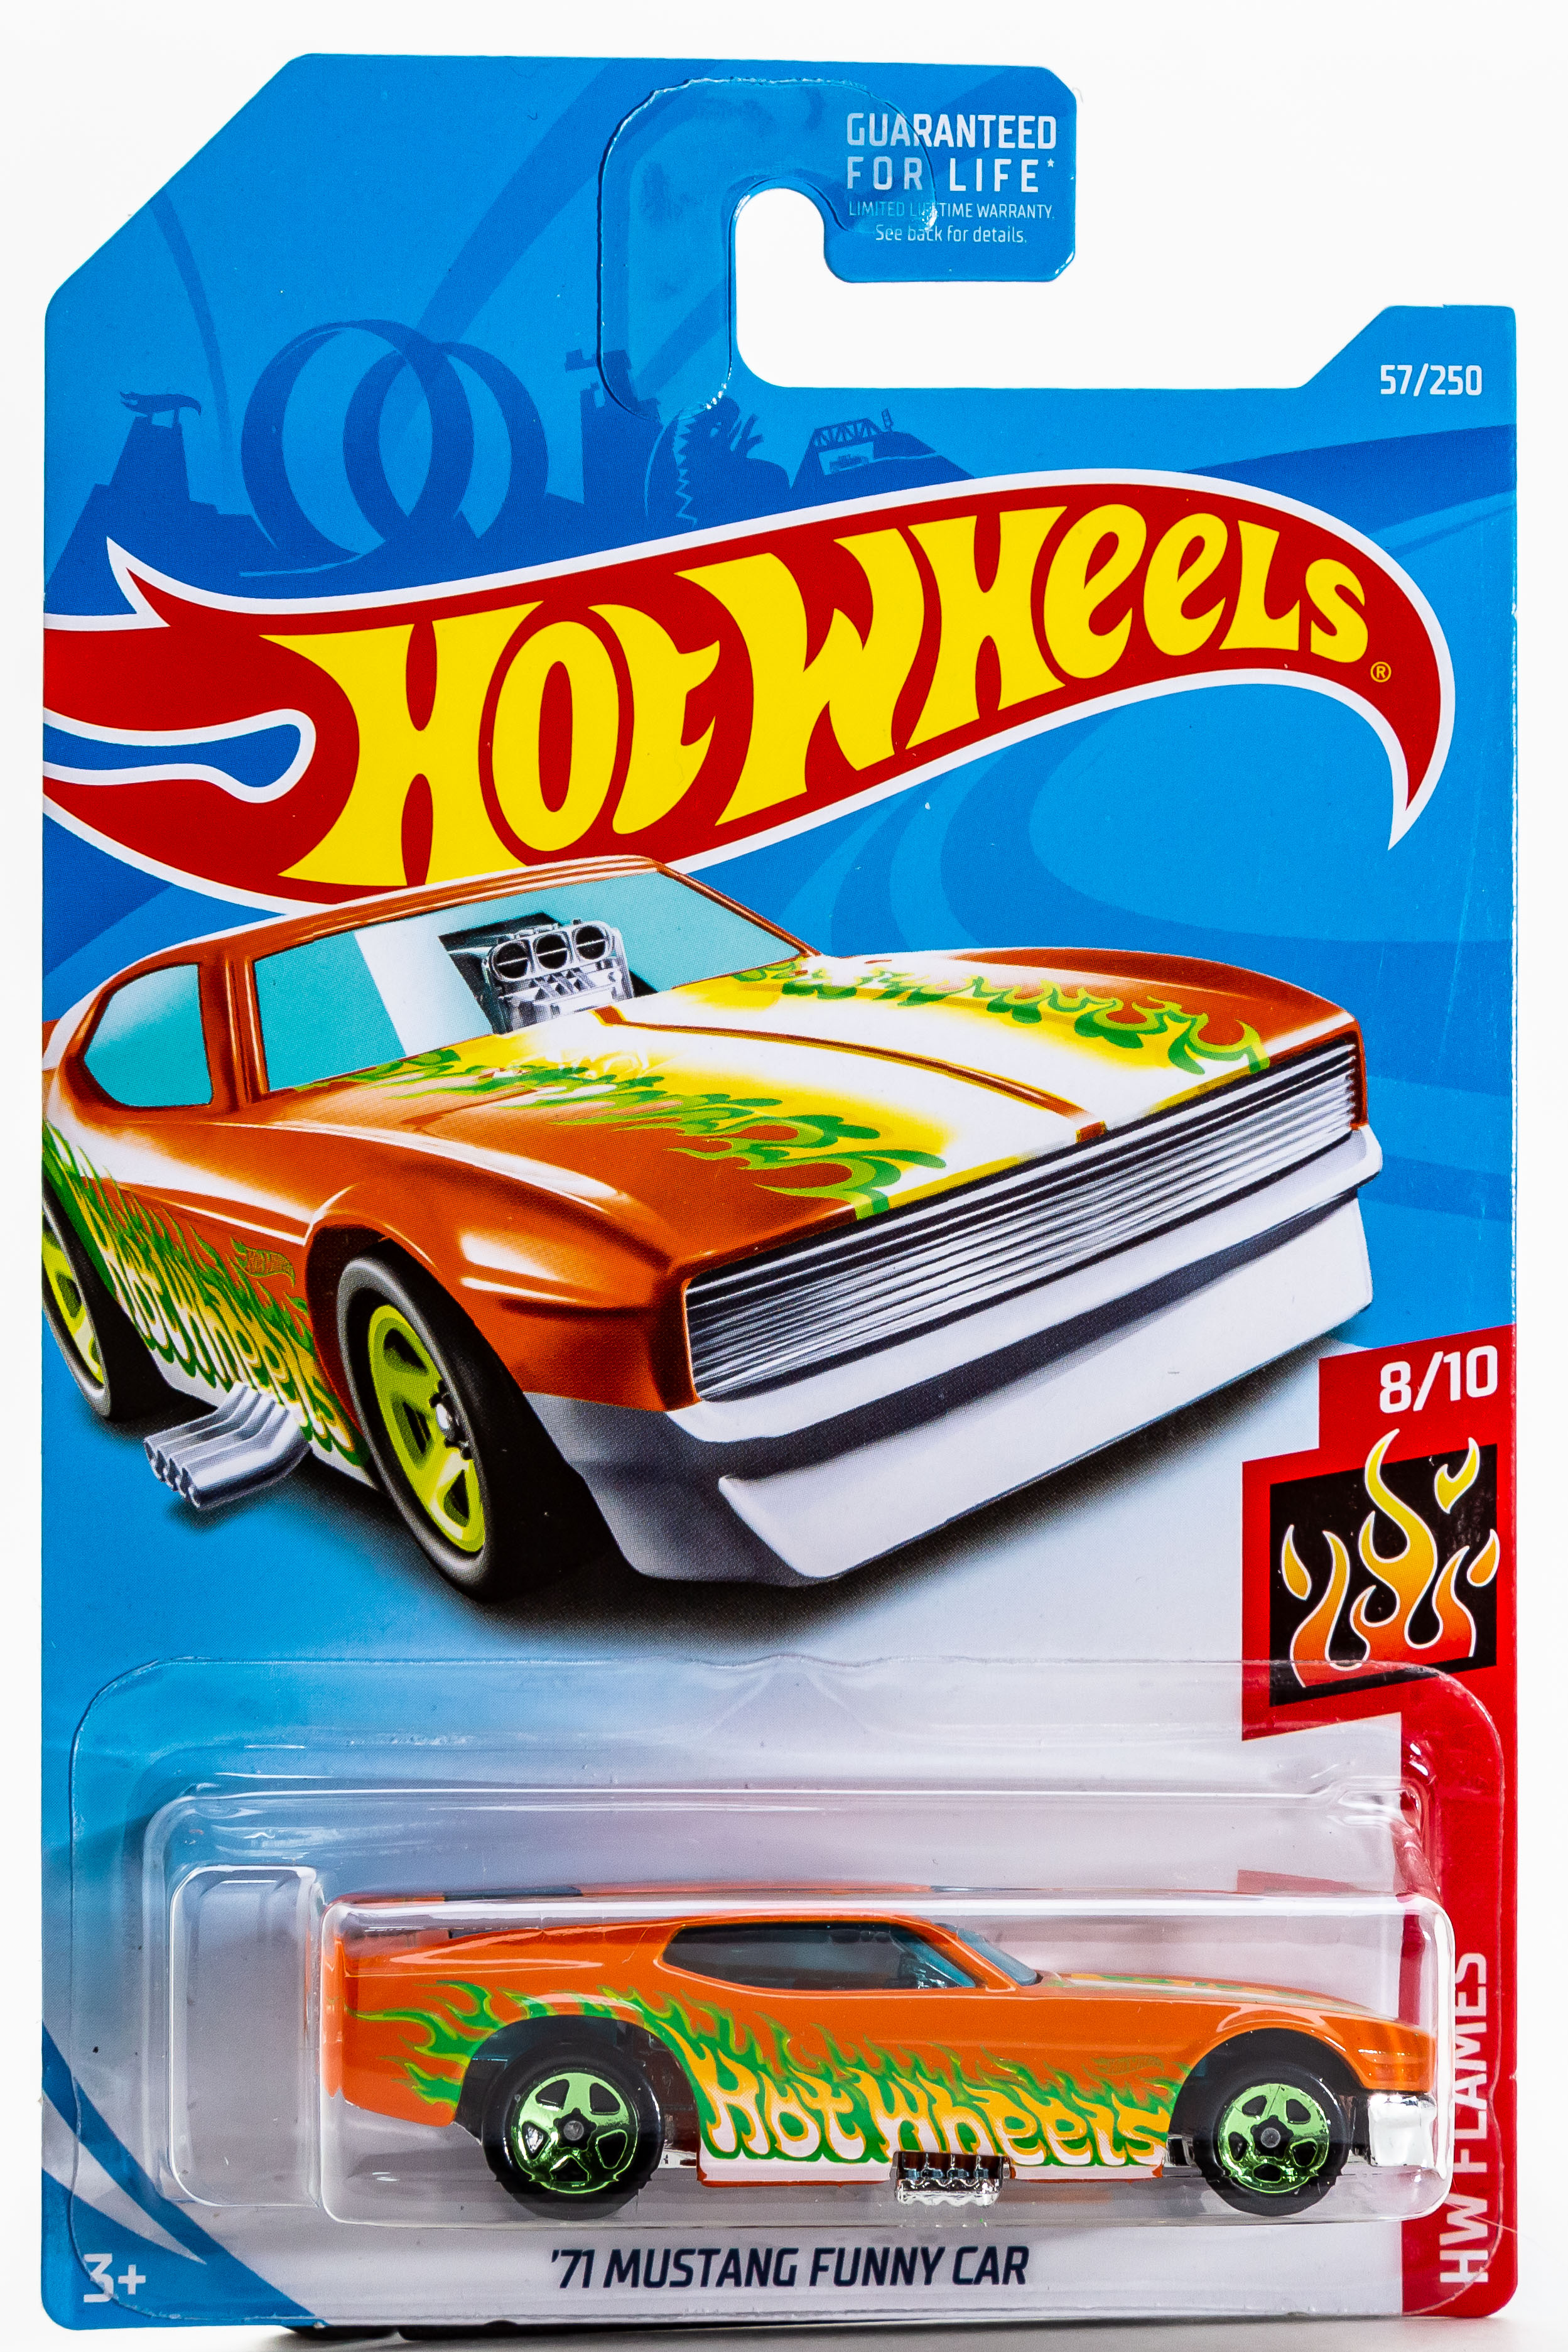 2012 HOT WHEELS FLYING CUSTOMS 1971 MUSTANG FUNNY CAR COMBINE SHIPPING 